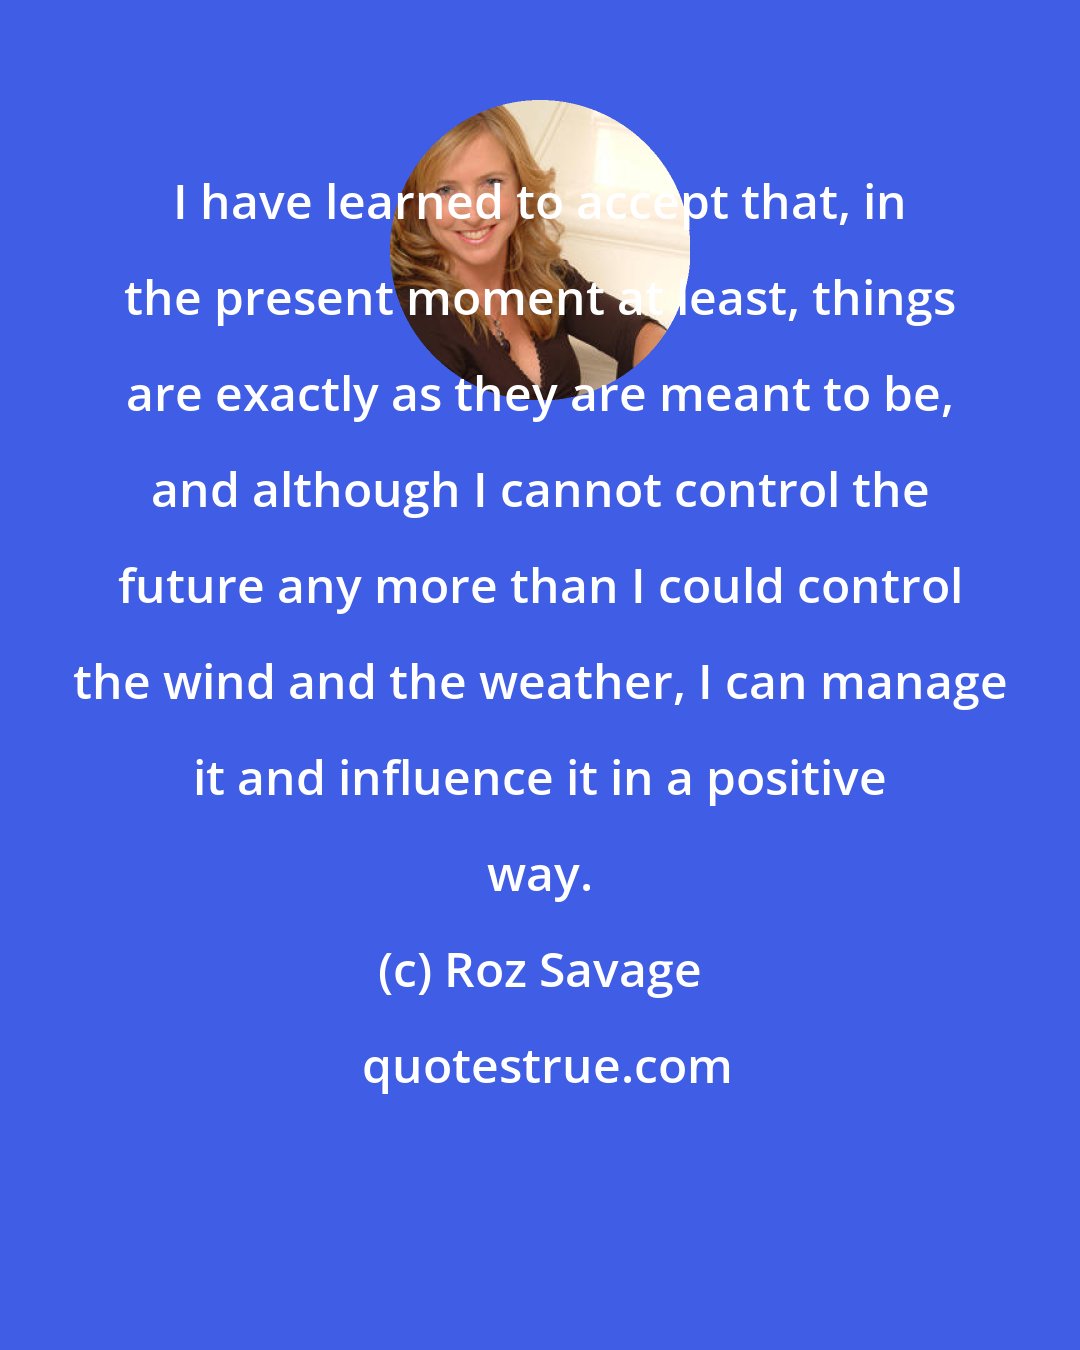 Roz Savage: I have learned to accept that, in the present moment at least, things are exactly as they are meant to be, and although I cannot control the future any more than I could control the wind and the weather, I can manage it and influence it in a positive way.